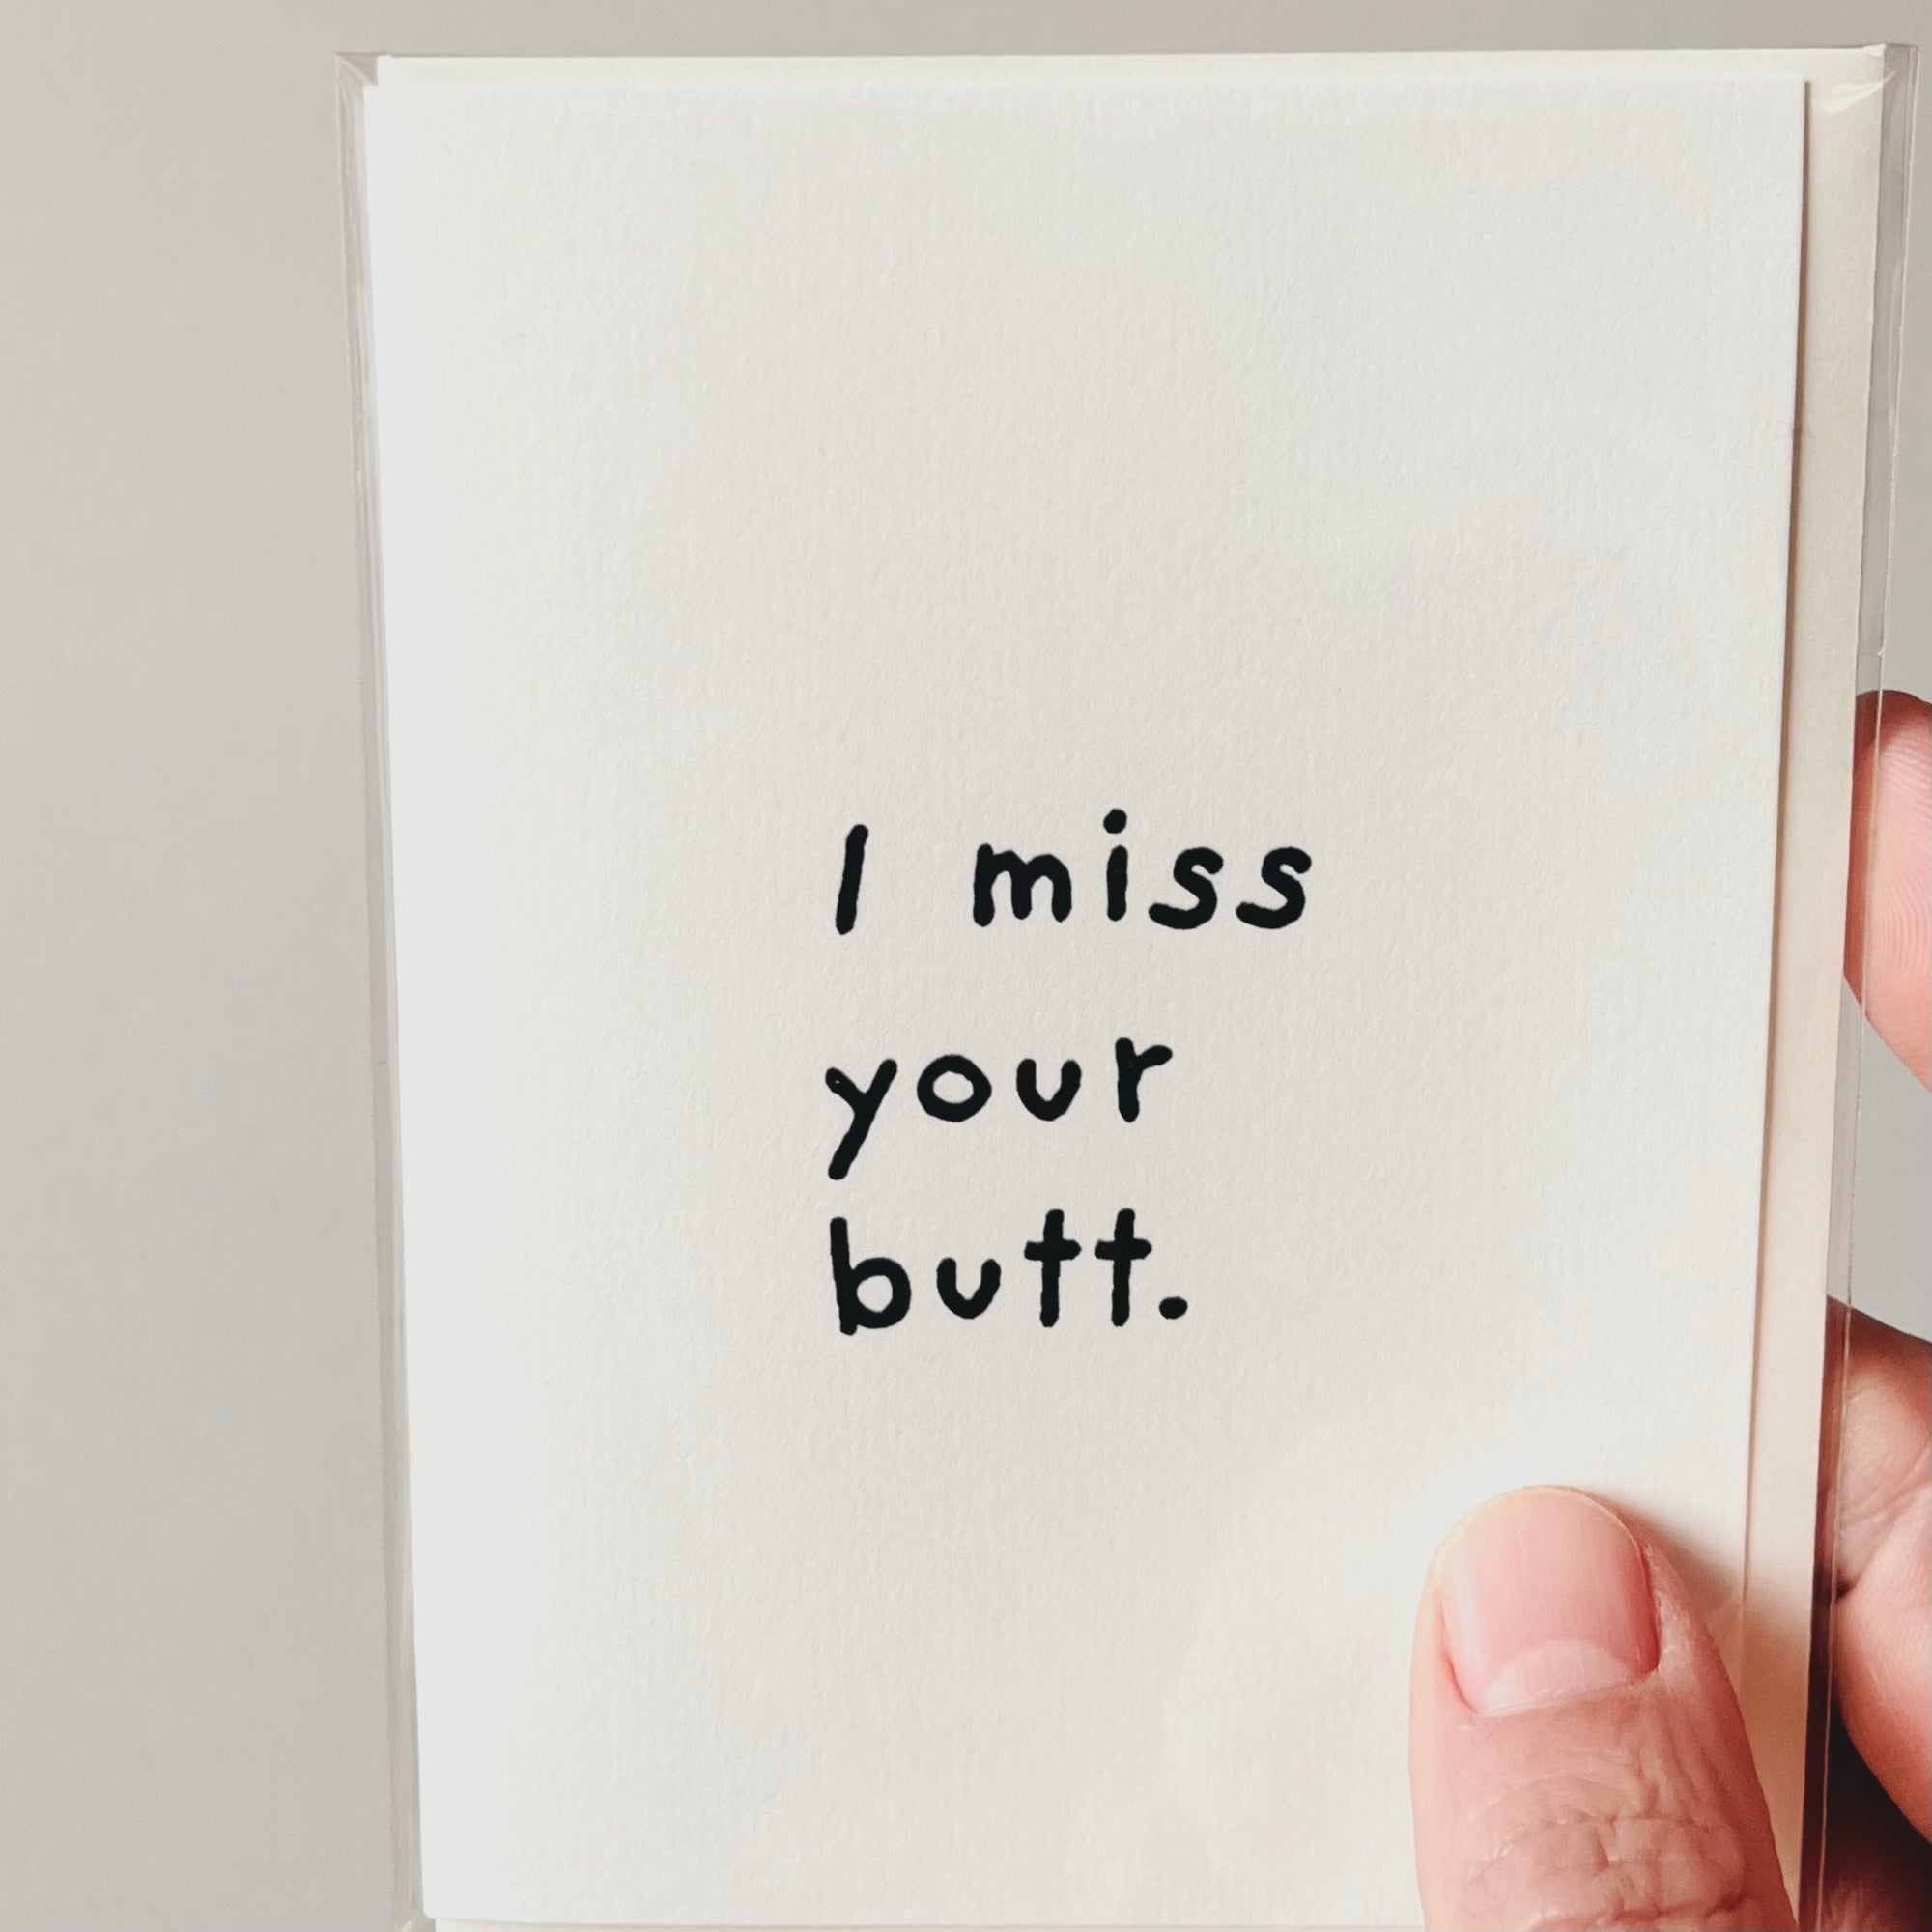 I miss your butt.